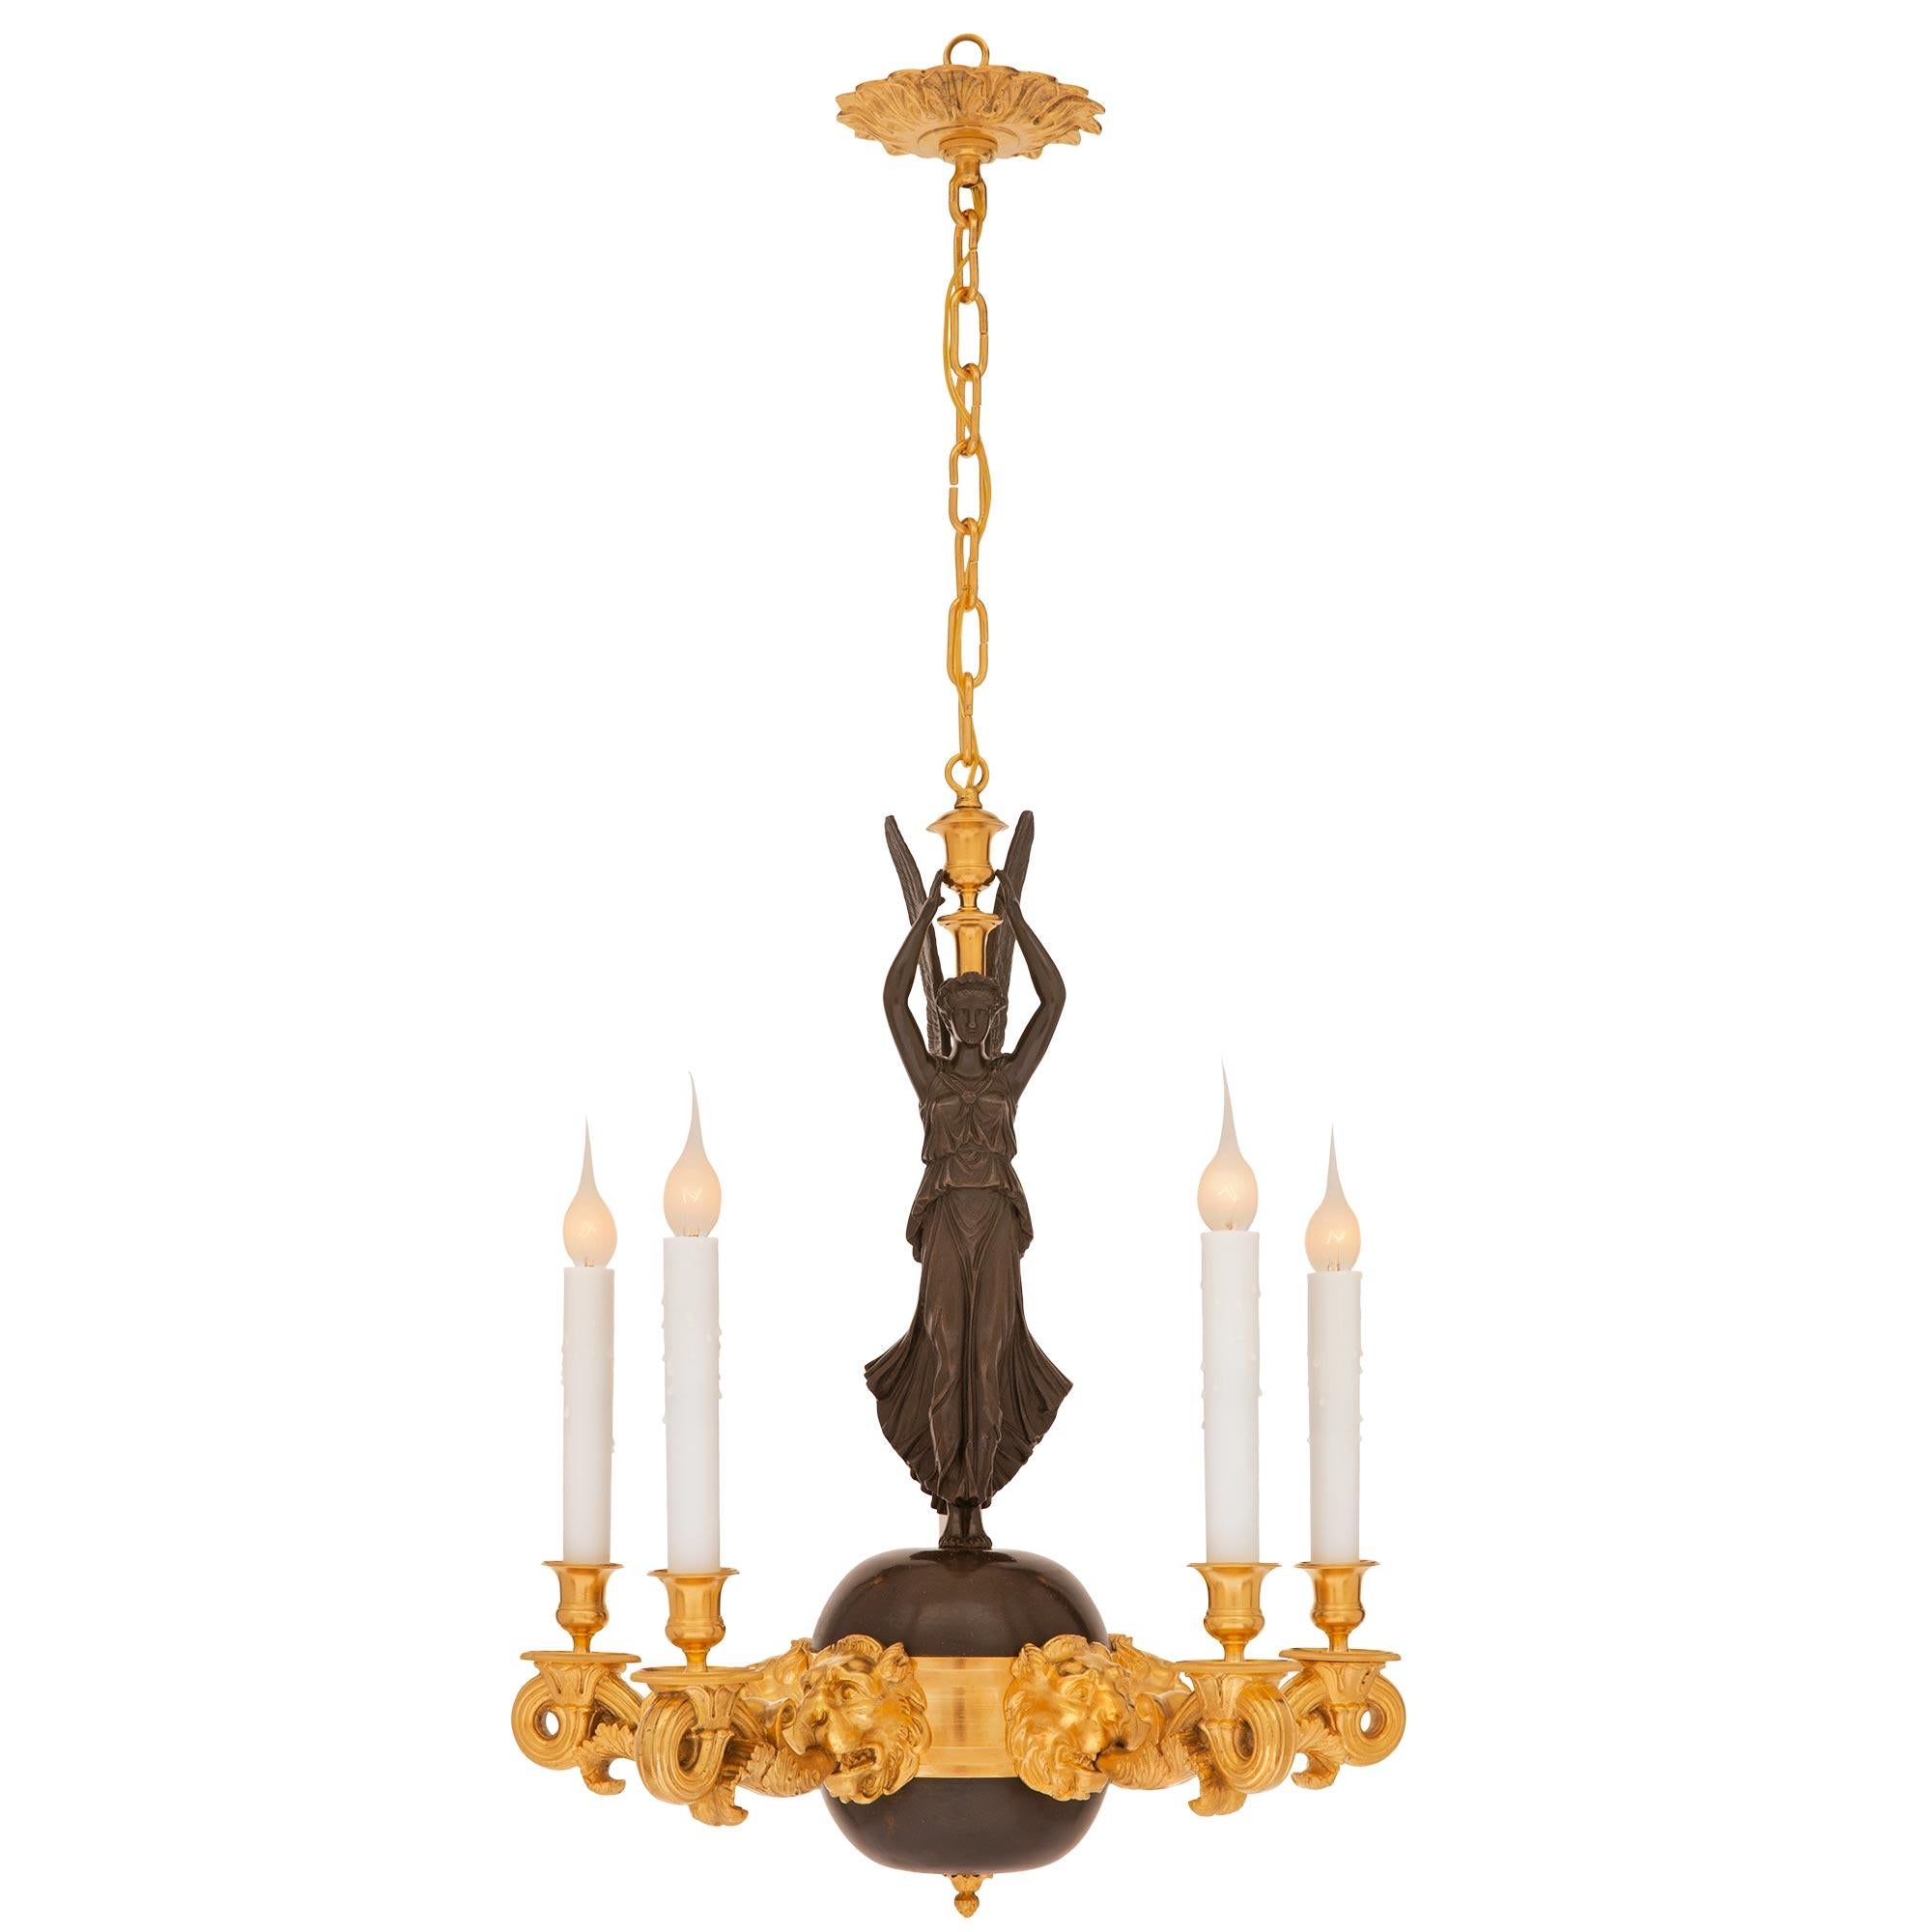 A beautiful and unique French 19th century Neo-Classical st. patinated bronze and ormolu chandelier. The five arm chandelier is centered by a striking patinated bronze ball with a fine bottom acorn finial and an impressive richly chased open winged